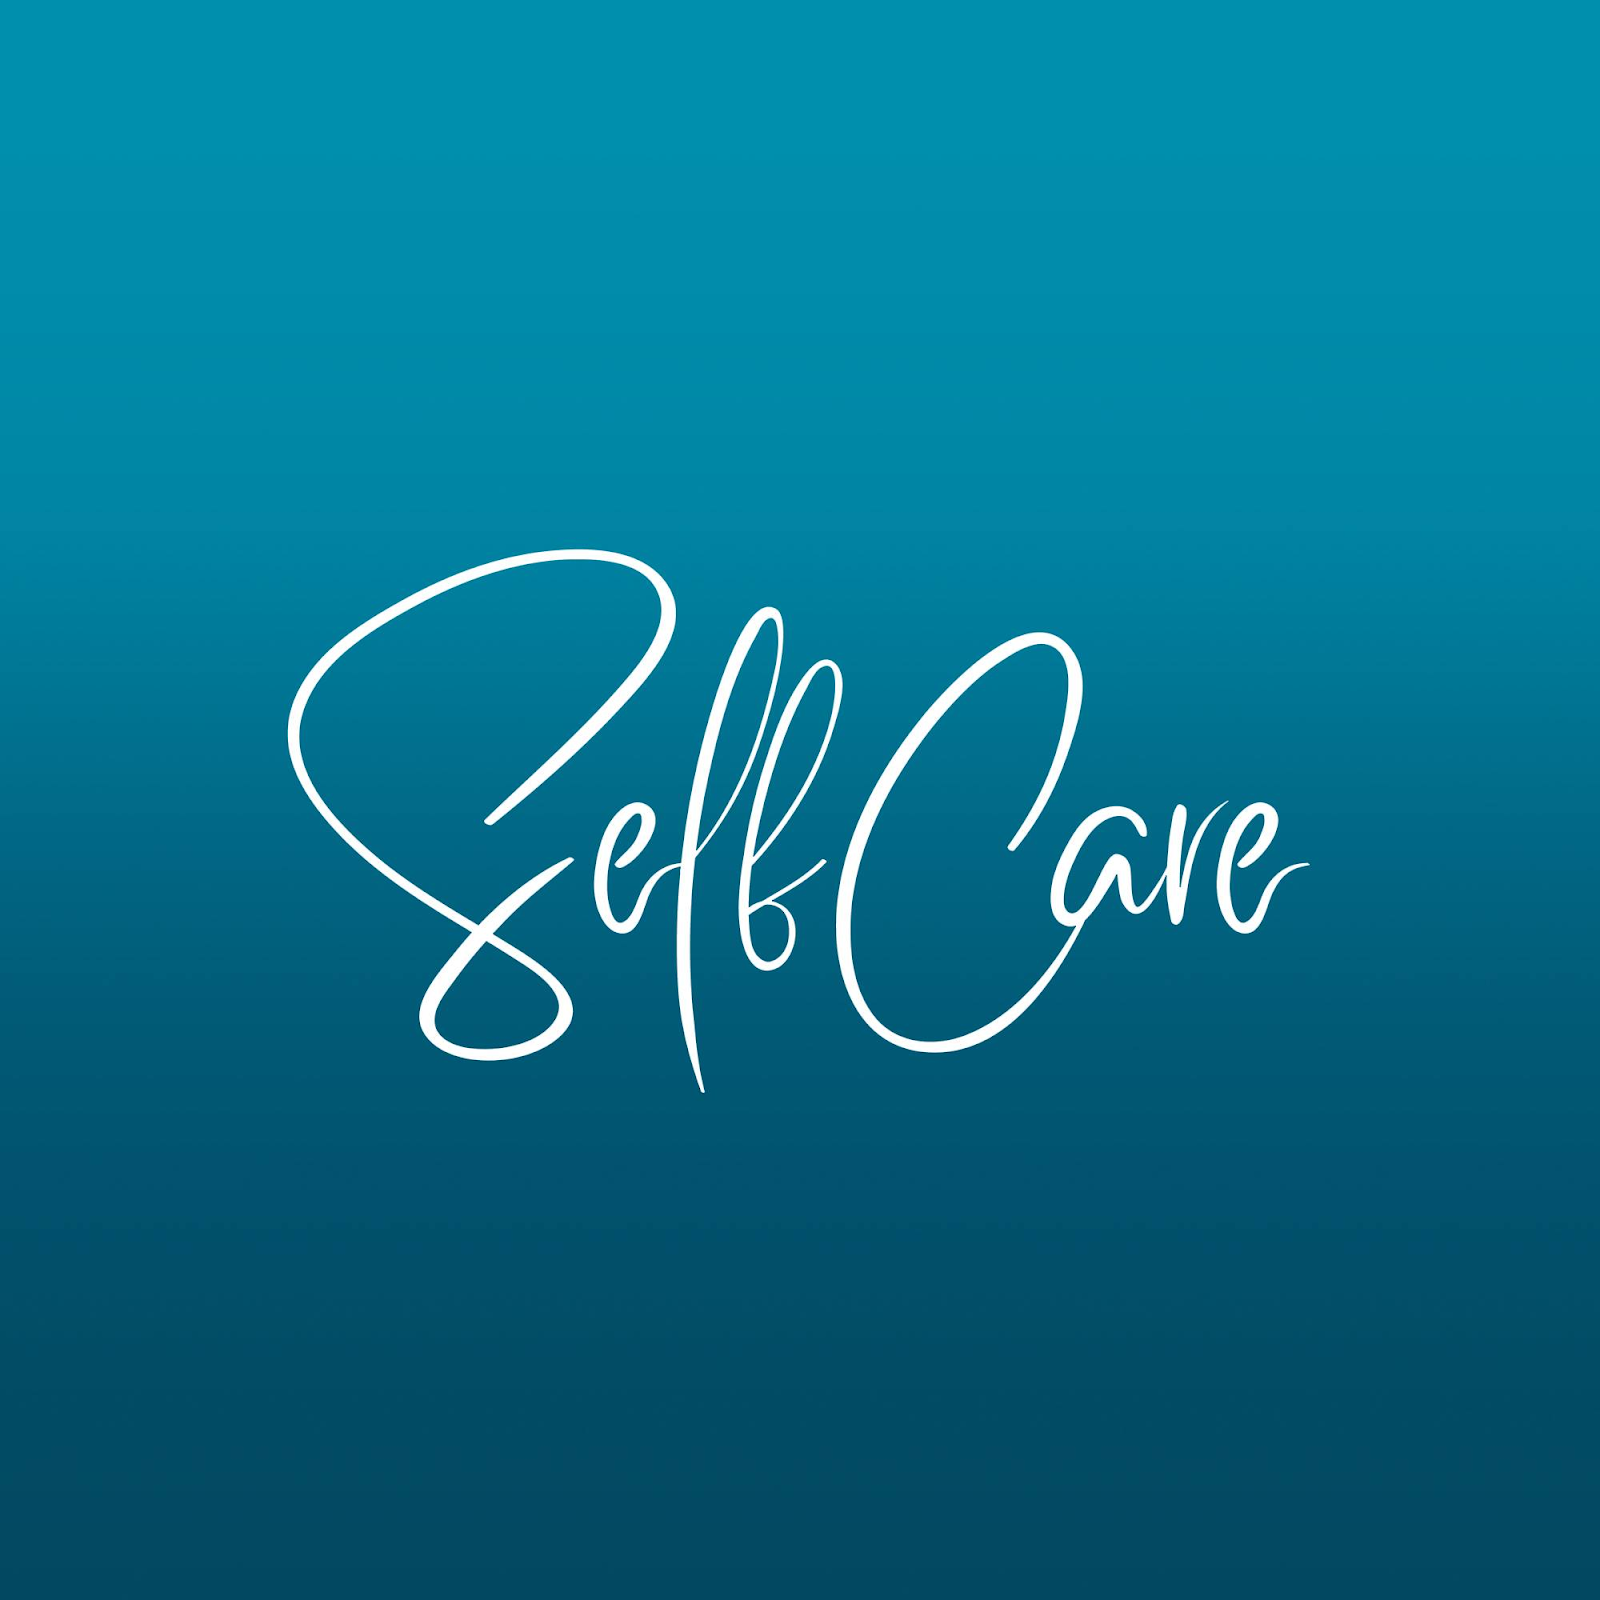 Love Yourself - Self Care before Giving Care - Avaz Inc.